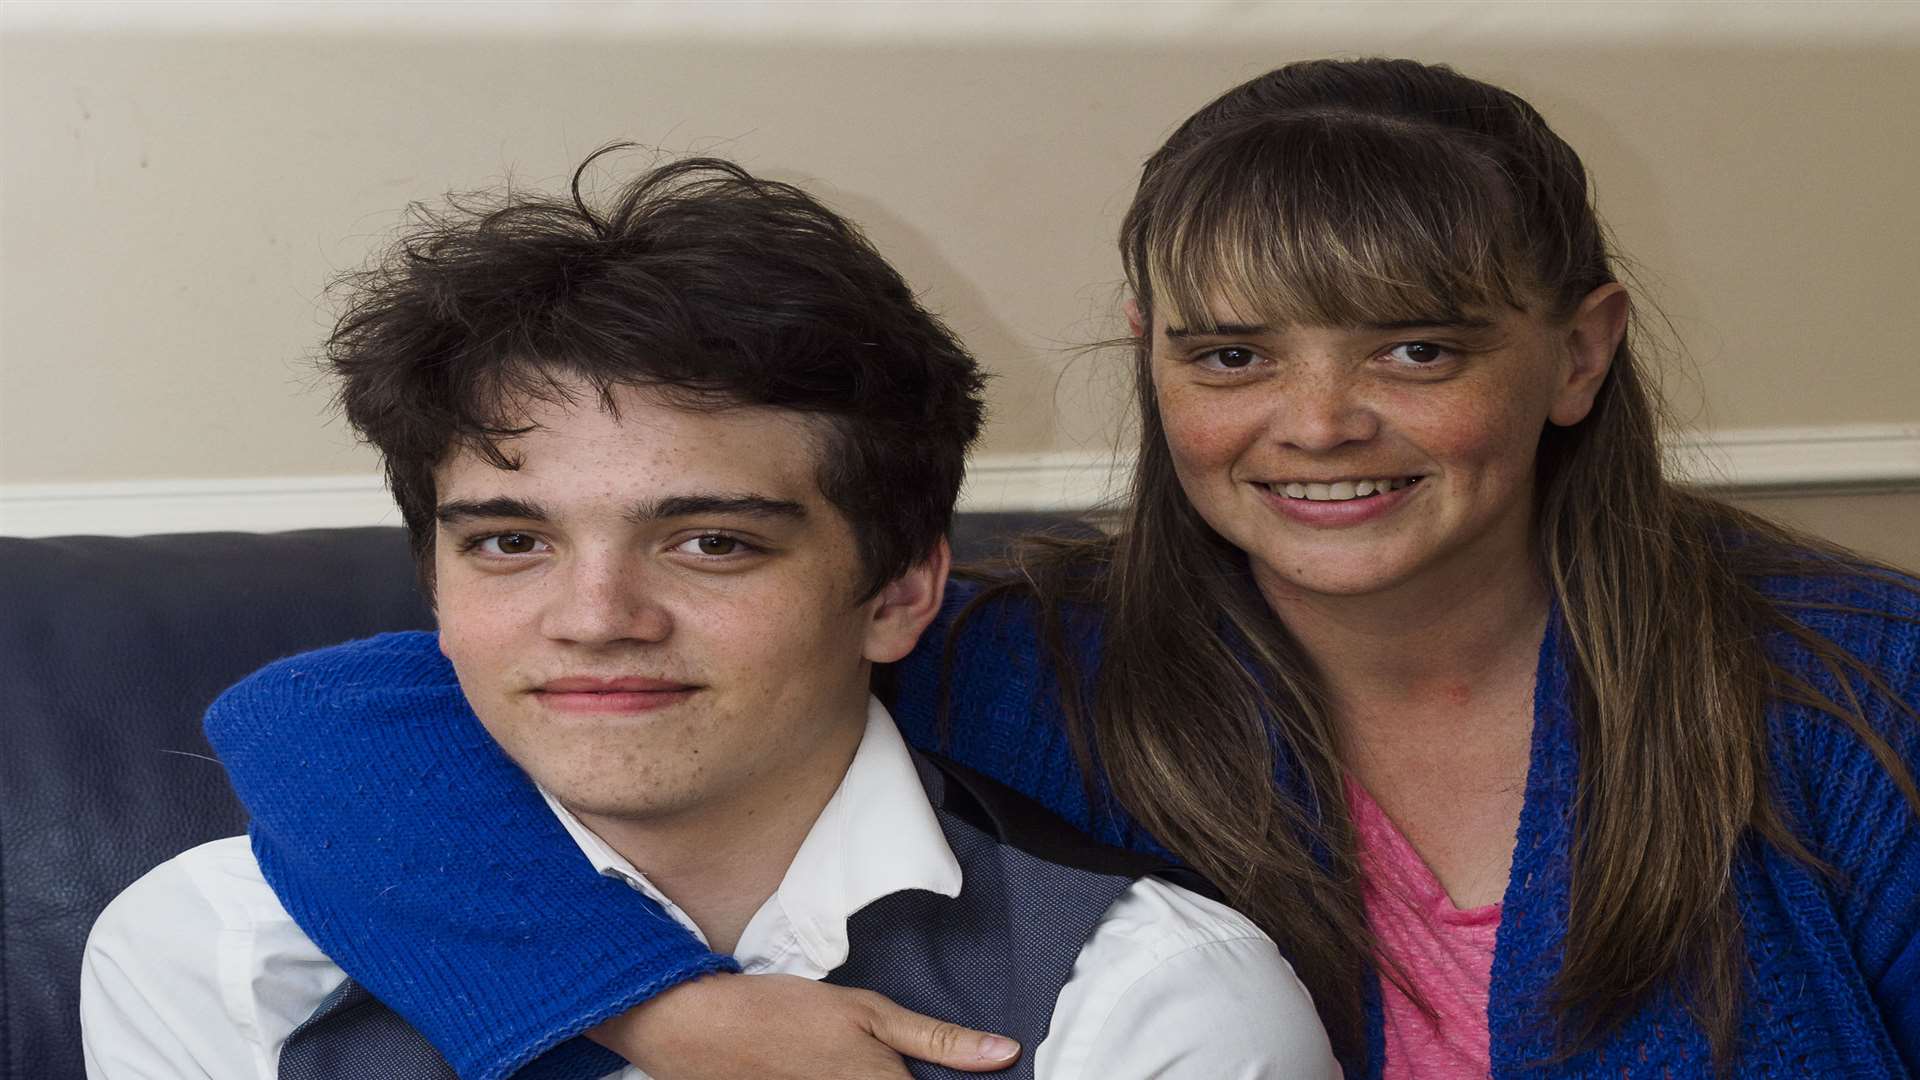 James, pictured with his mother Fiona, is starring in a play at The Hazlitt Theatre about his recovery from a stroke